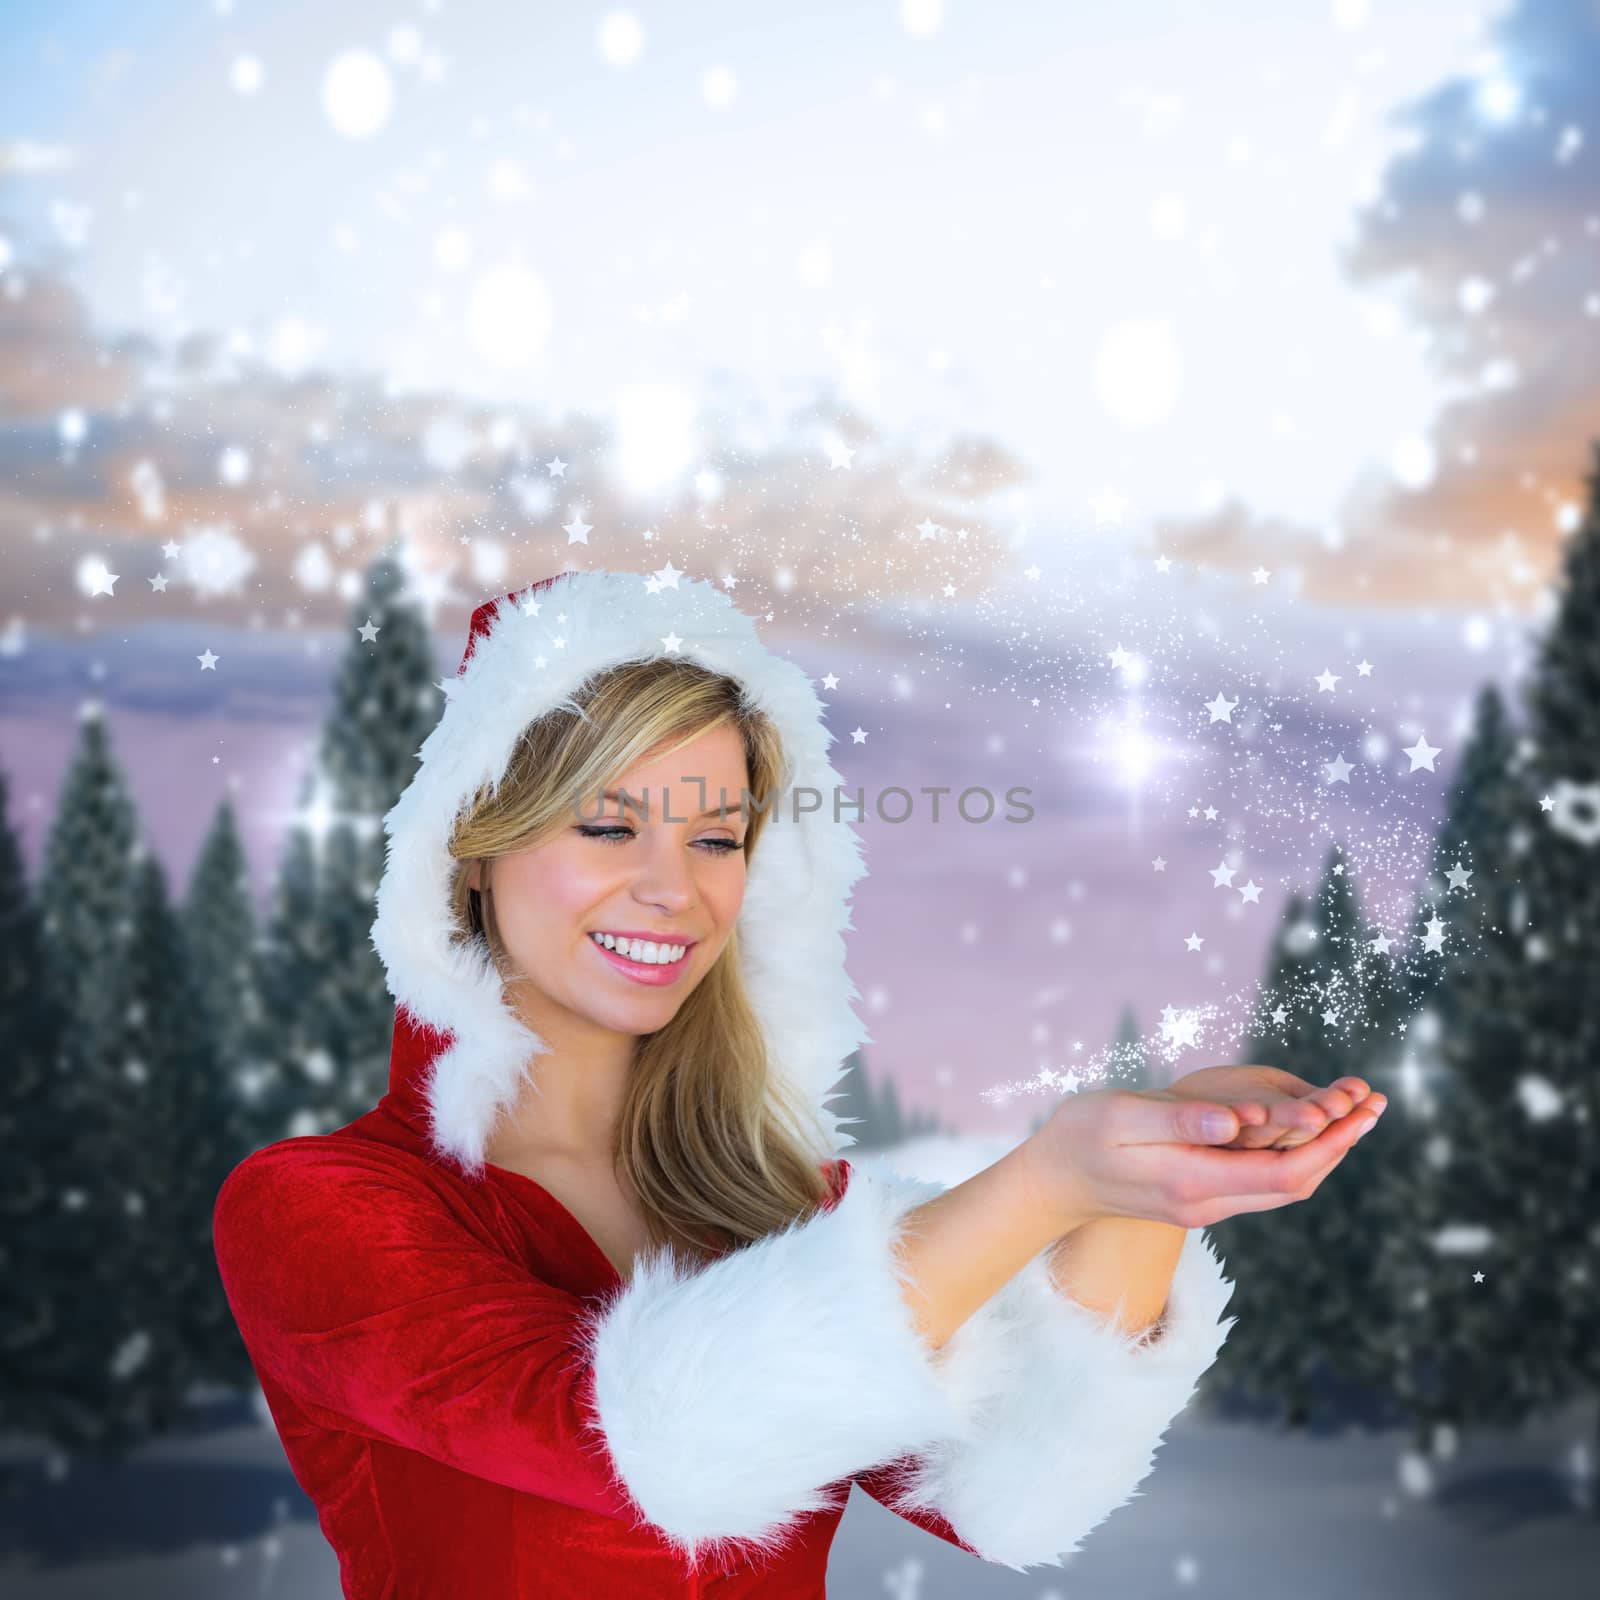 Pretty girl holding hands out in santa outfit against snowy landscape with fir trees